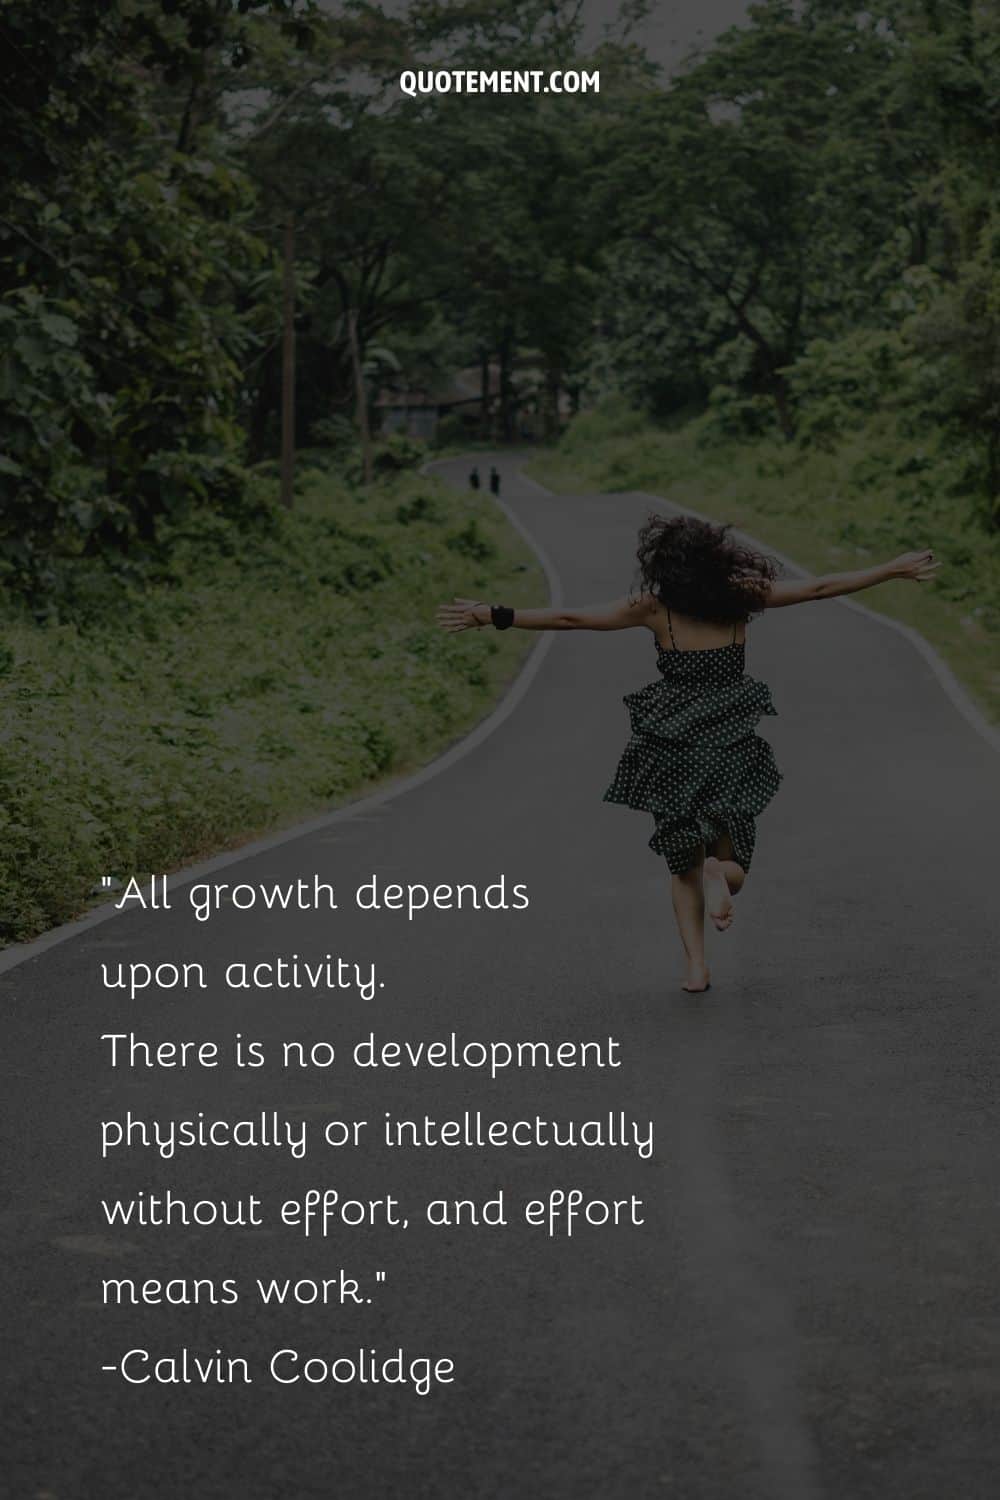 All growth depends upon activity